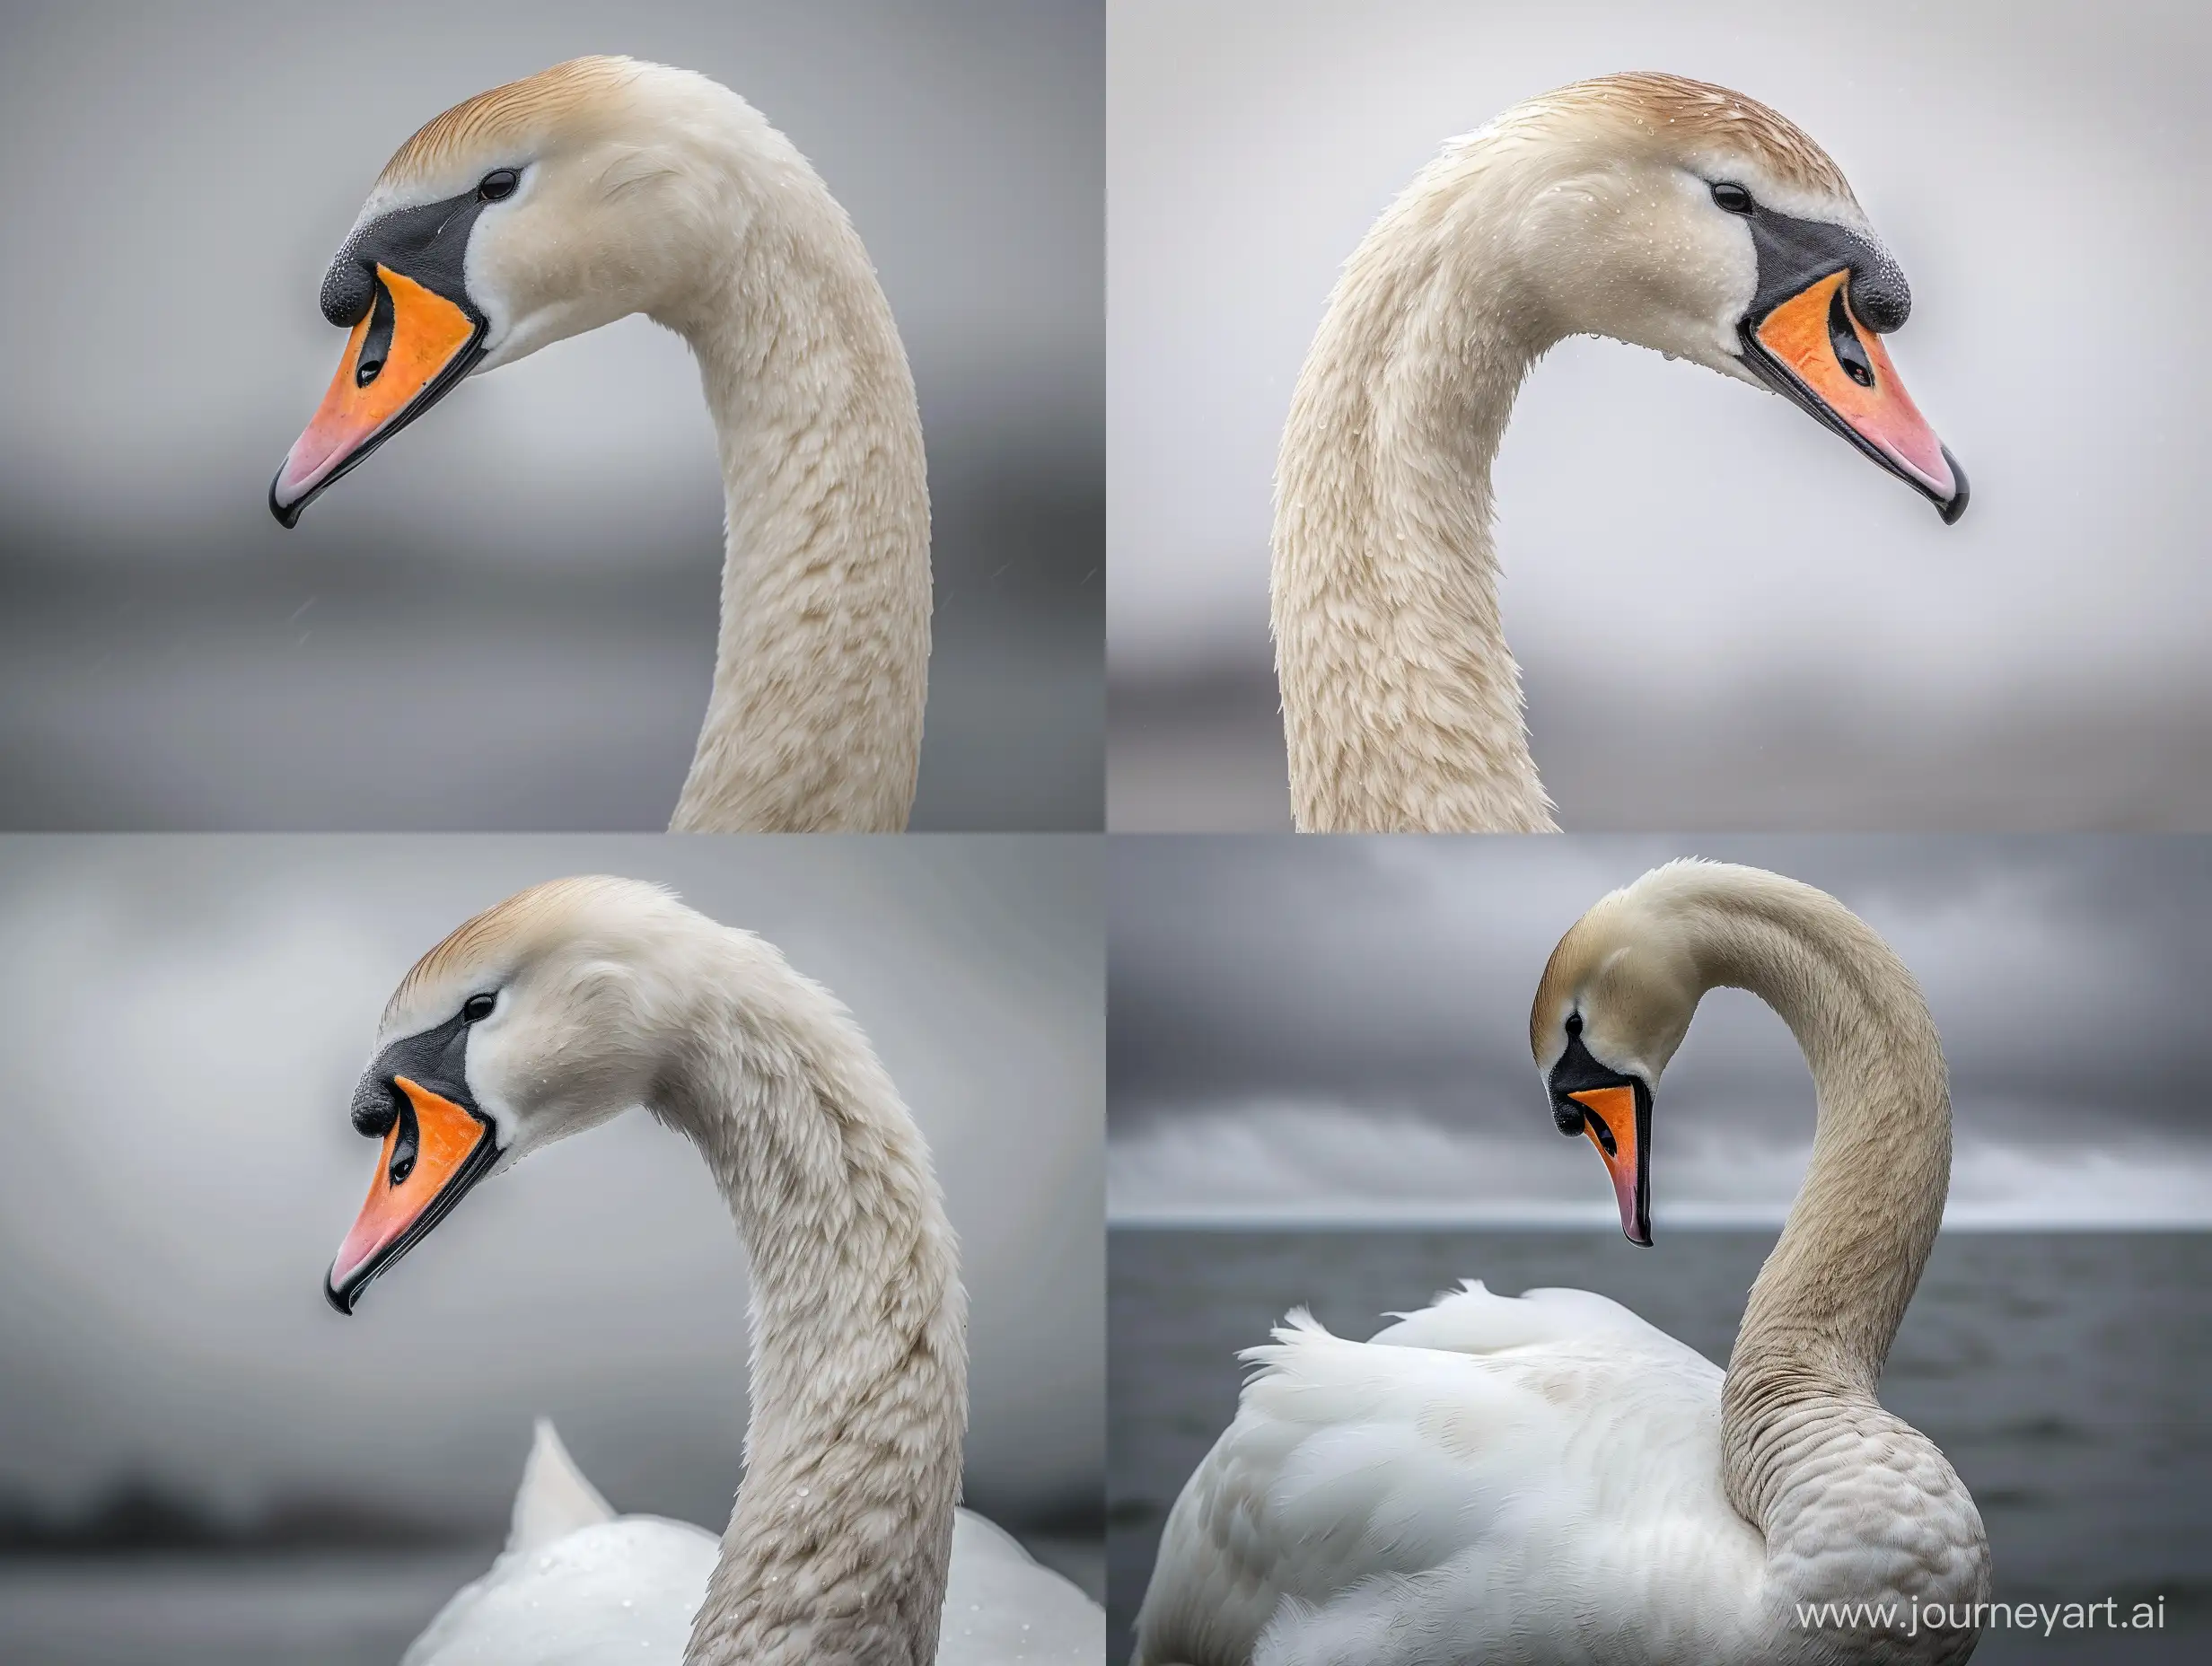 portrait photo of a beautiful white swan on a cloudy day, detailed, national geographic, 4k, swan waterfowl picture taken by a nikon camera